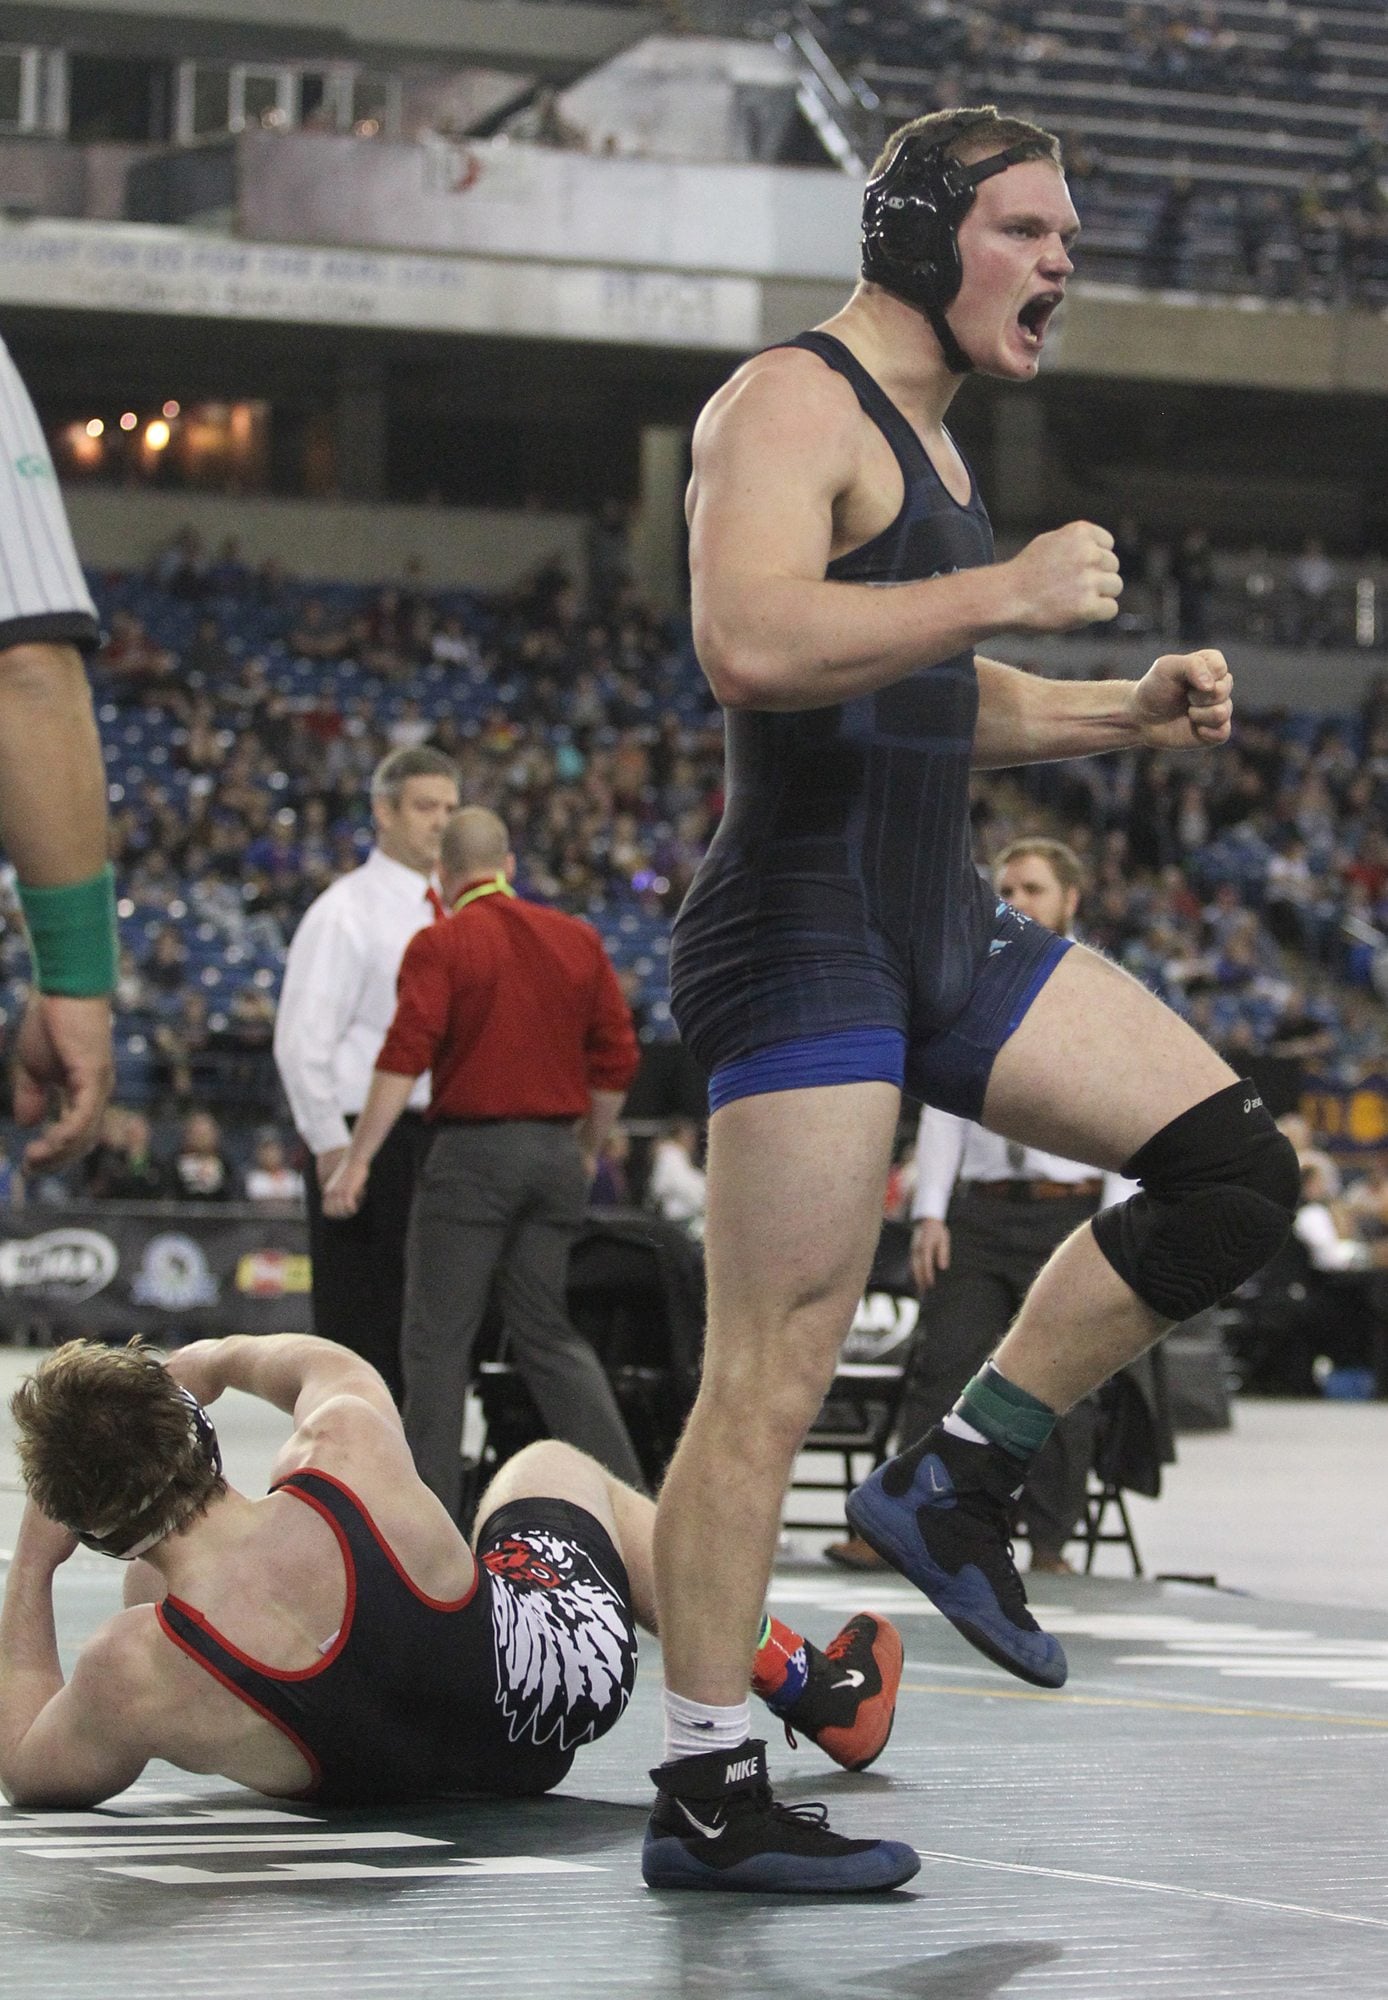 HOCKINSON's  Cameron Loos celebrates after pinning  CHENEY's Michael Ferguson to take the gold medal in the 220 match on Saturday, February 19, 2016 at the Mat Classic XXVIII Championship matches held in the Tacoma Dome.